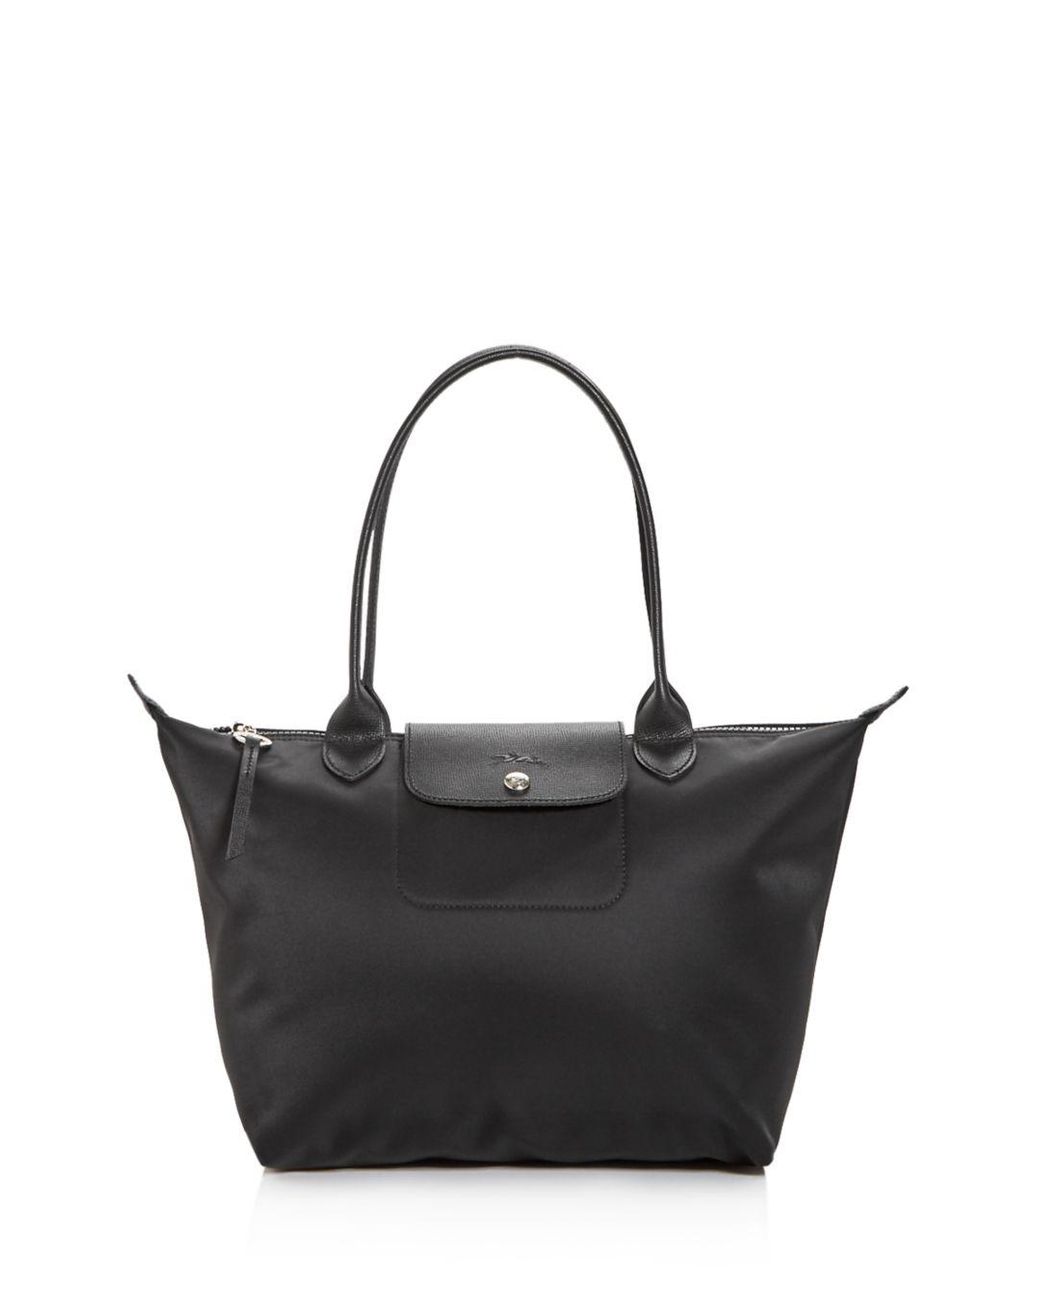 Longchamp Synthetic Le Pliage Neo Small Nylon Shoulder Tote in Black - Lyst